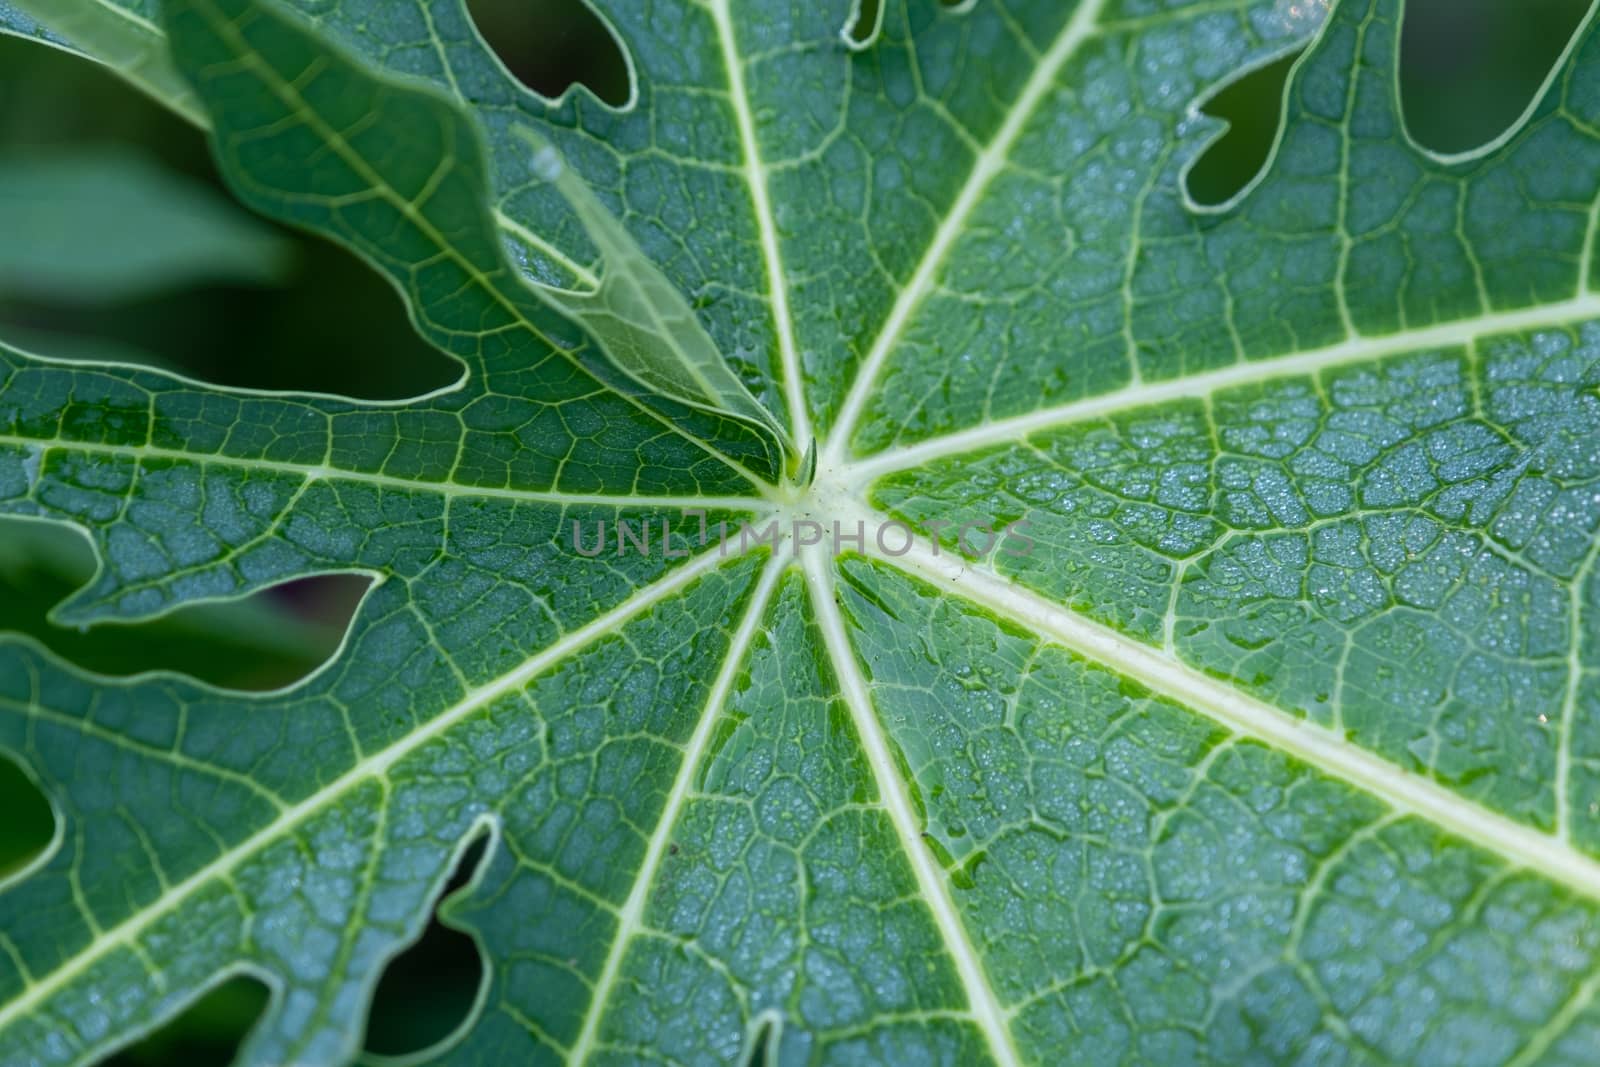 The Rain drop on papaya leaf background show pattern With shadow edge, select focus by peerapixs